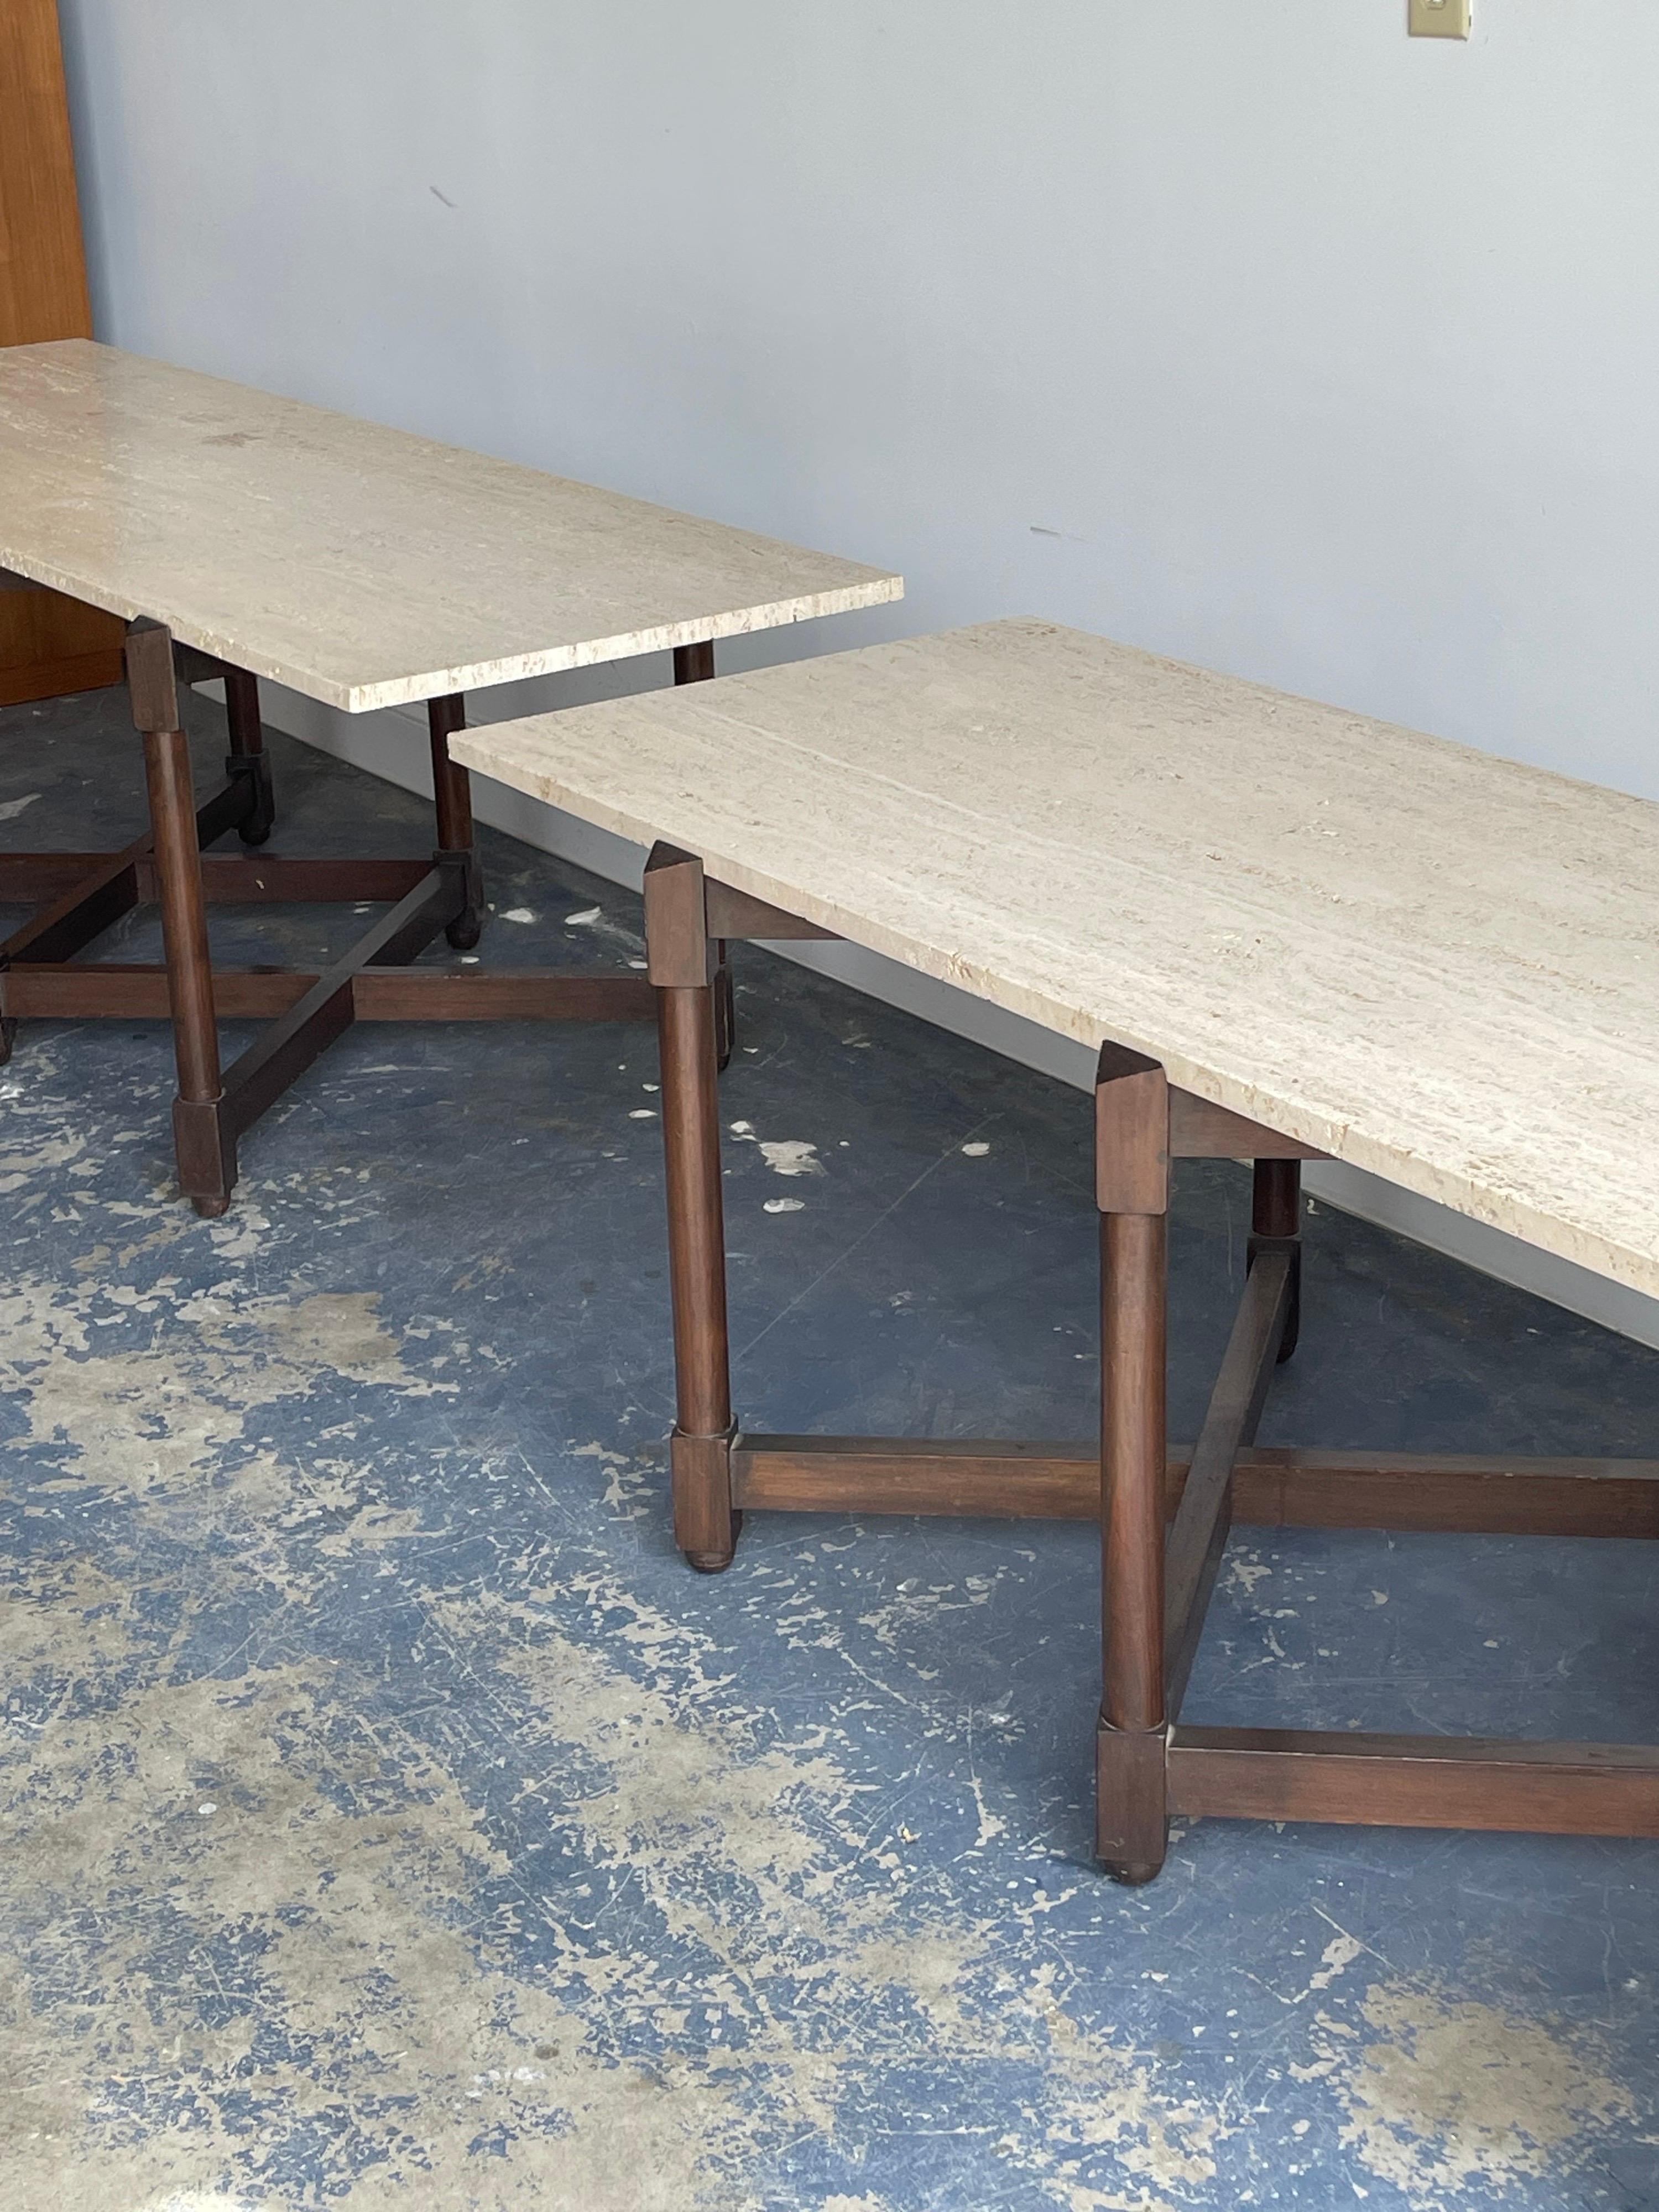 Very large tables attributed to Edward Wormley for Dunbar. Walnut frames and unfilled polished stone tops.

Would work well in a variety of interiors such as modern, mid century modern, contemporary, etc. Piece blends seamlessly with other designers